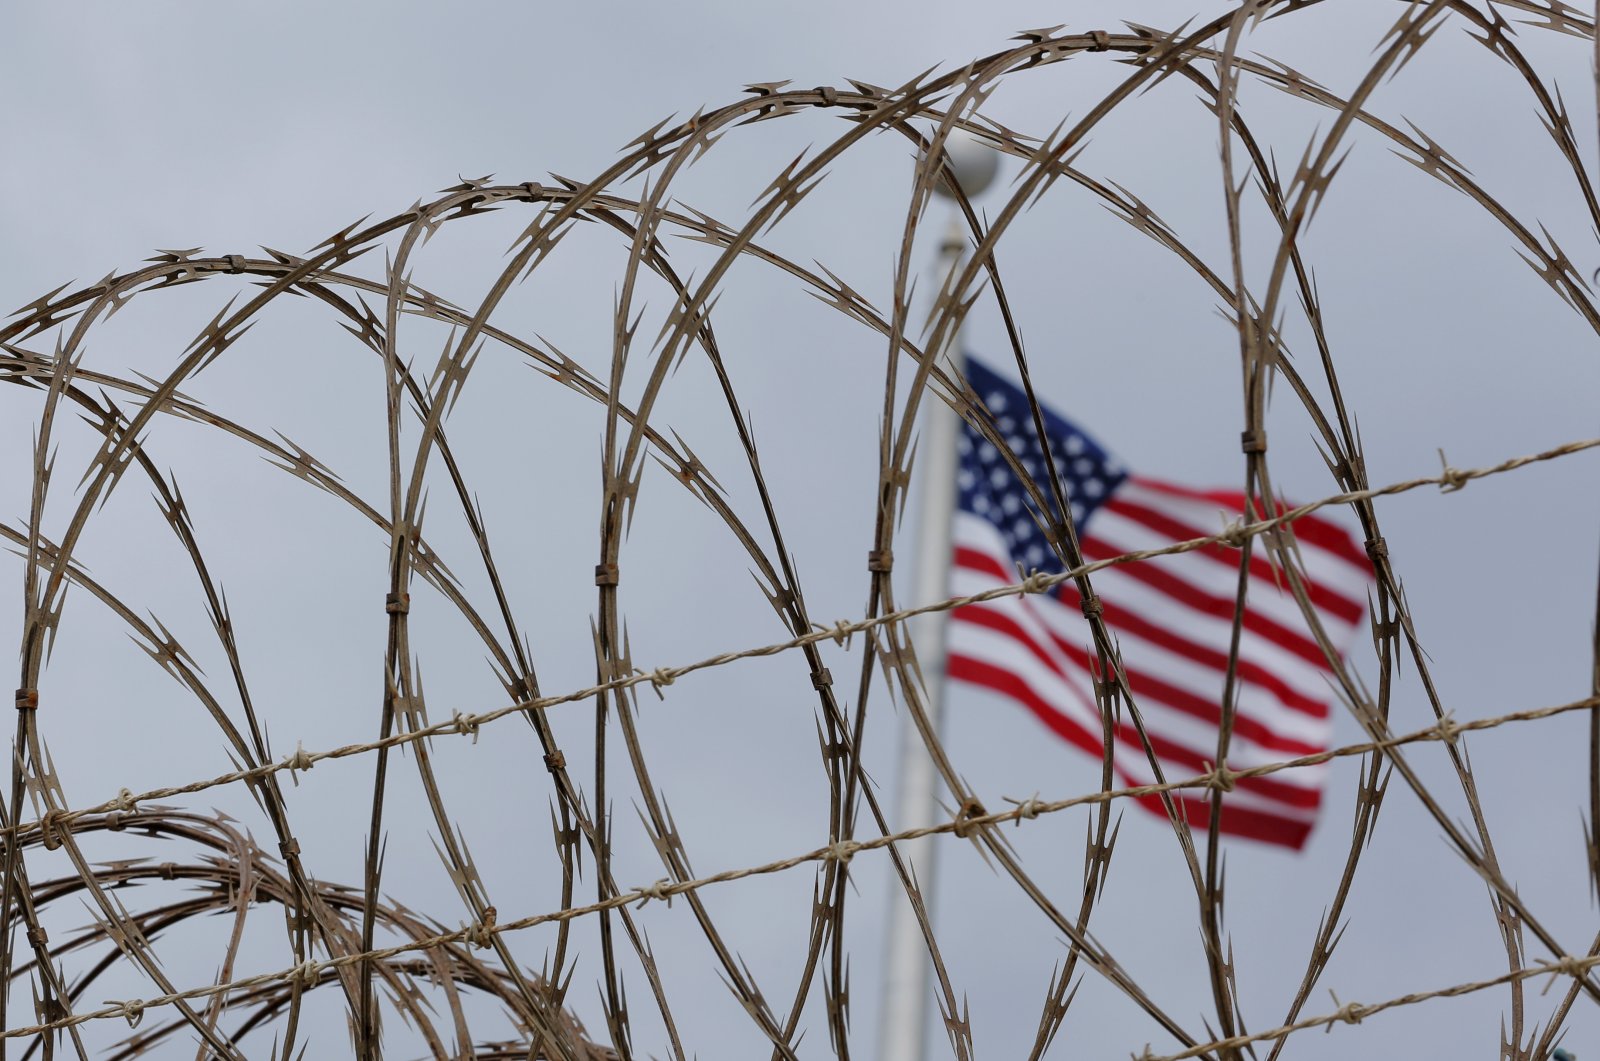 The United States flag flies inside of Joint Task Force Guantanamo Camp VI at the U.S. naval base in Guantanamo Bay, Cuba, March 22, 2016. (Reuters File Photo)